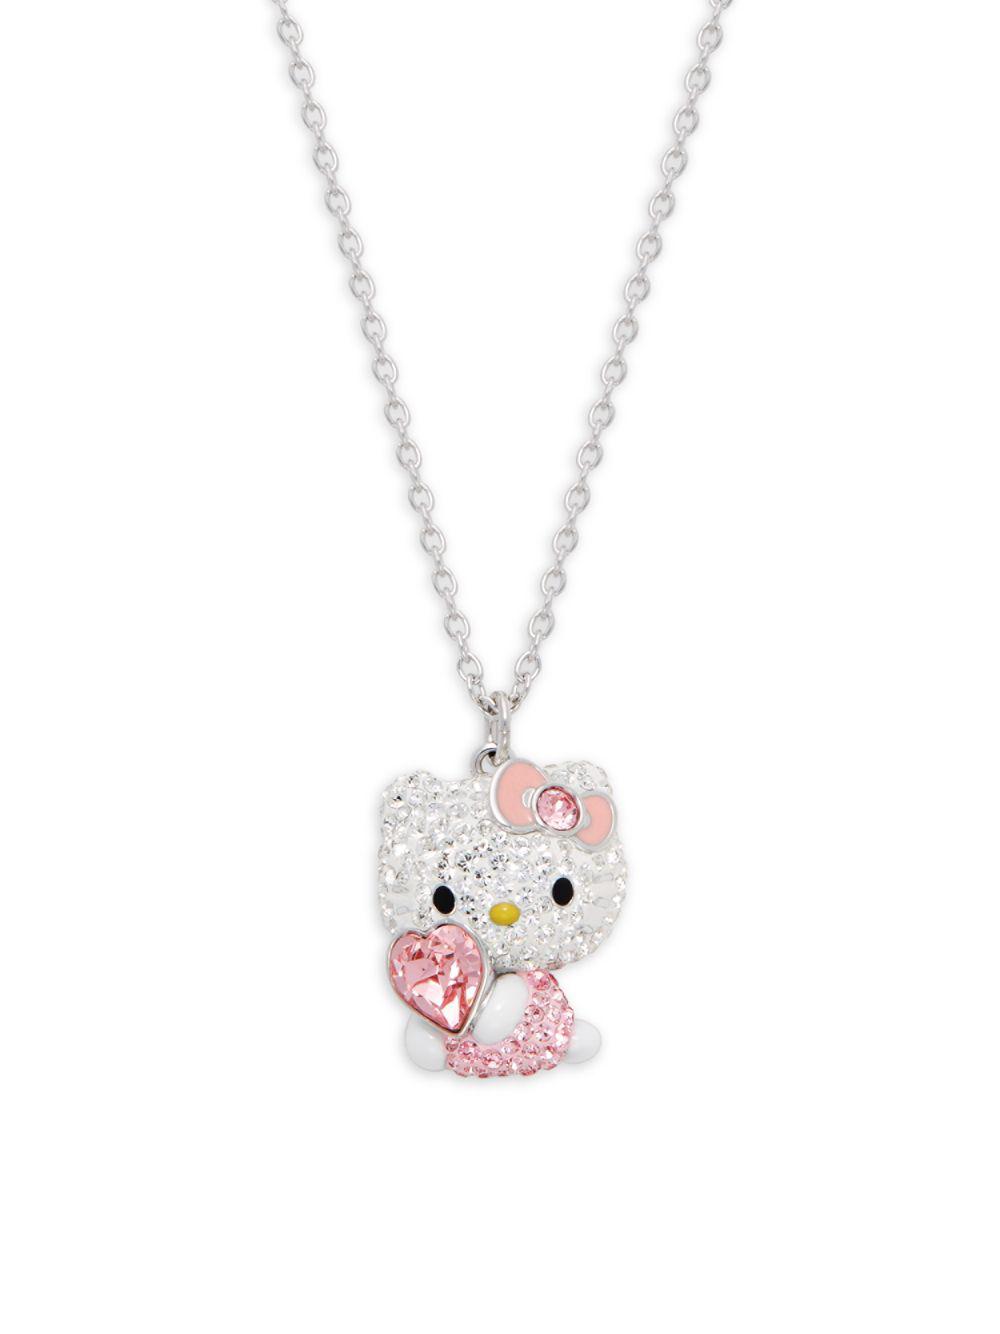 Pink and Clear Crystal Necklace Hello Kitty Pendant Necklace 